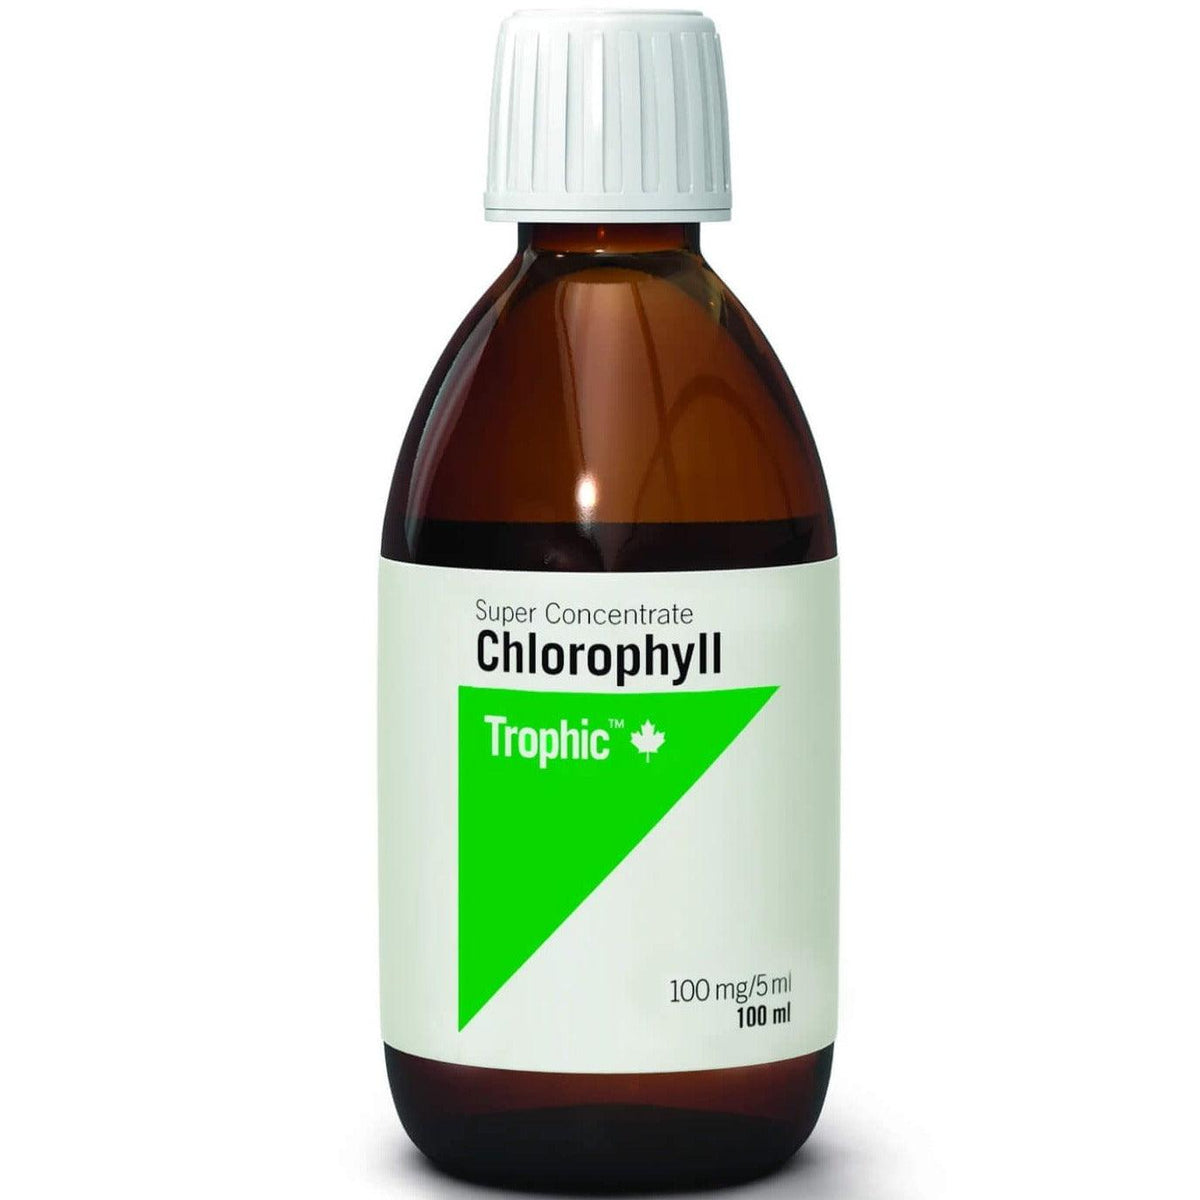 Trophic Chlorophyll Super Concentrate 100mg/5ml 100mL Supplements at Village Vitamin Store